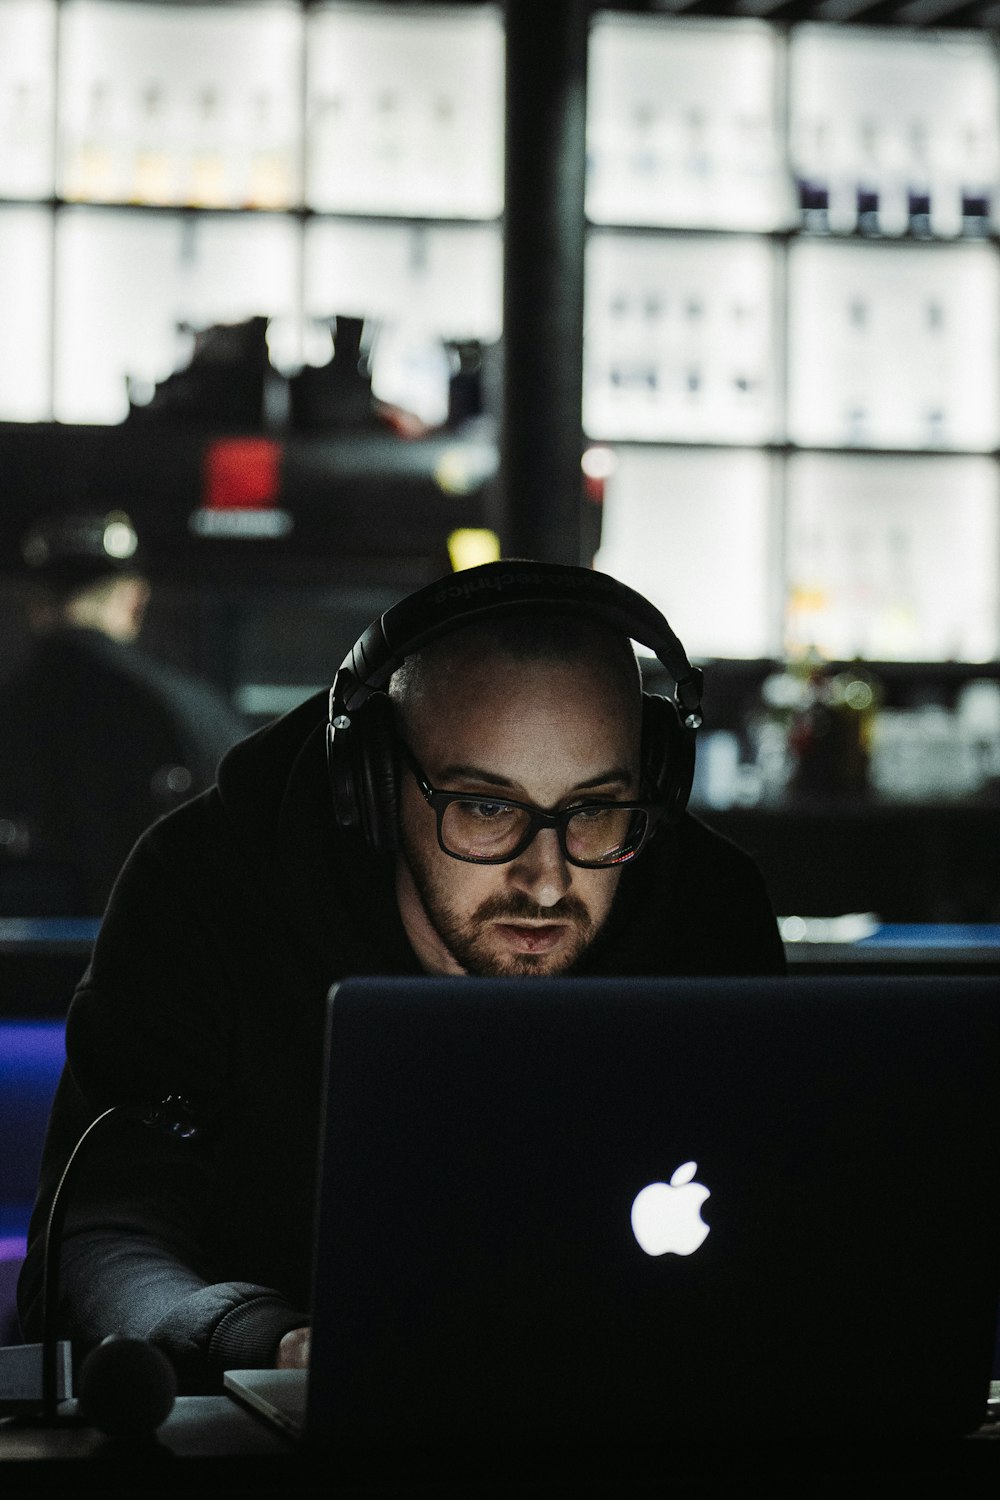 a man wearing headphones and using a laptop